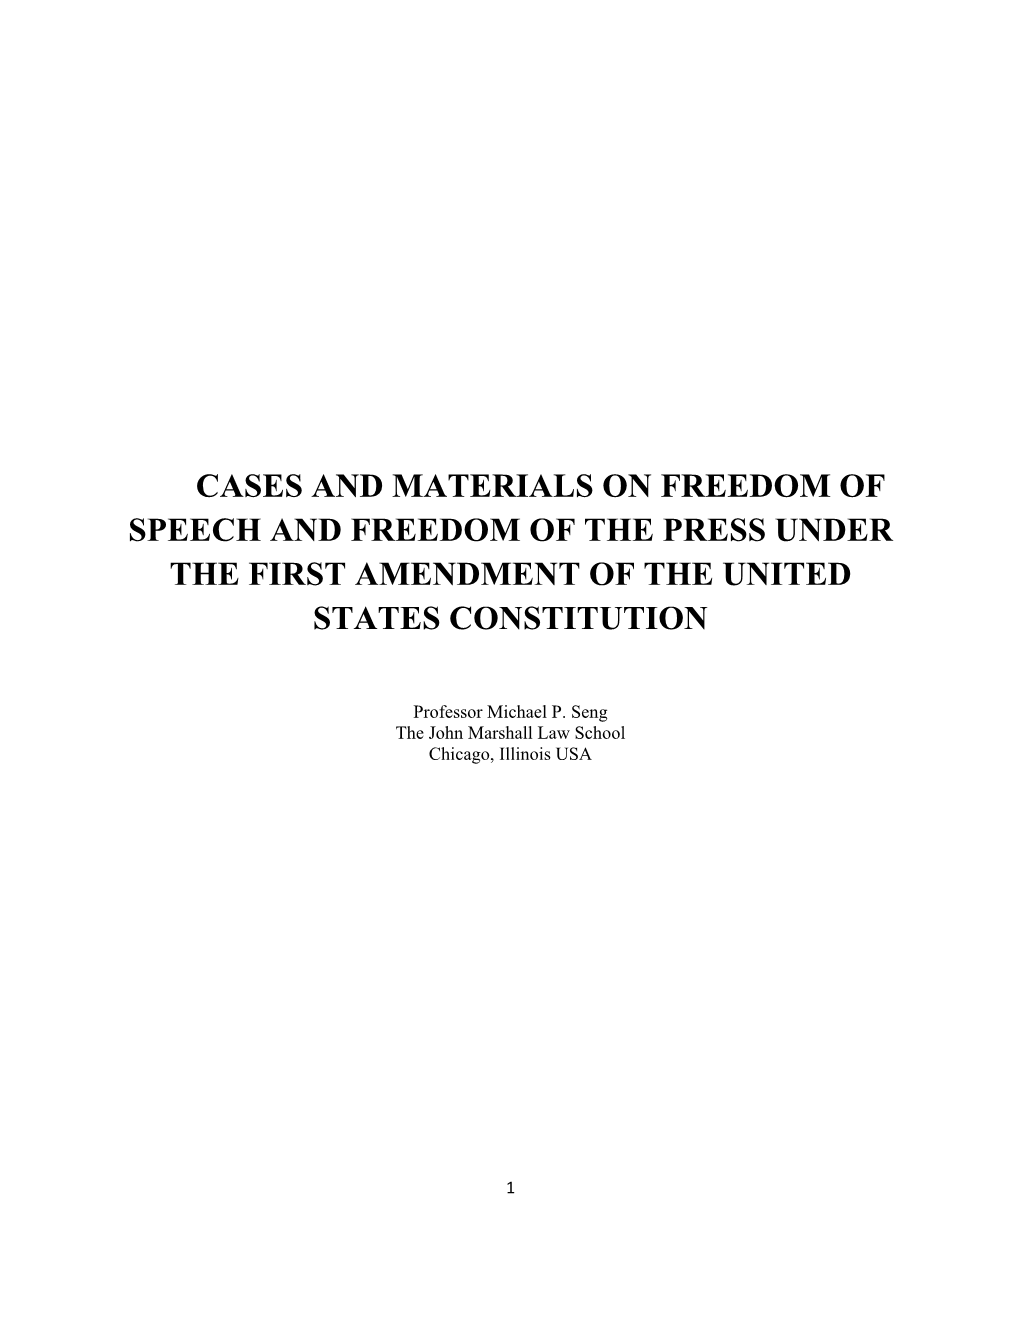 Cases and Materials on Freedom of Speech and Freedom of the Press Under the First Amendment of the United States Constitution